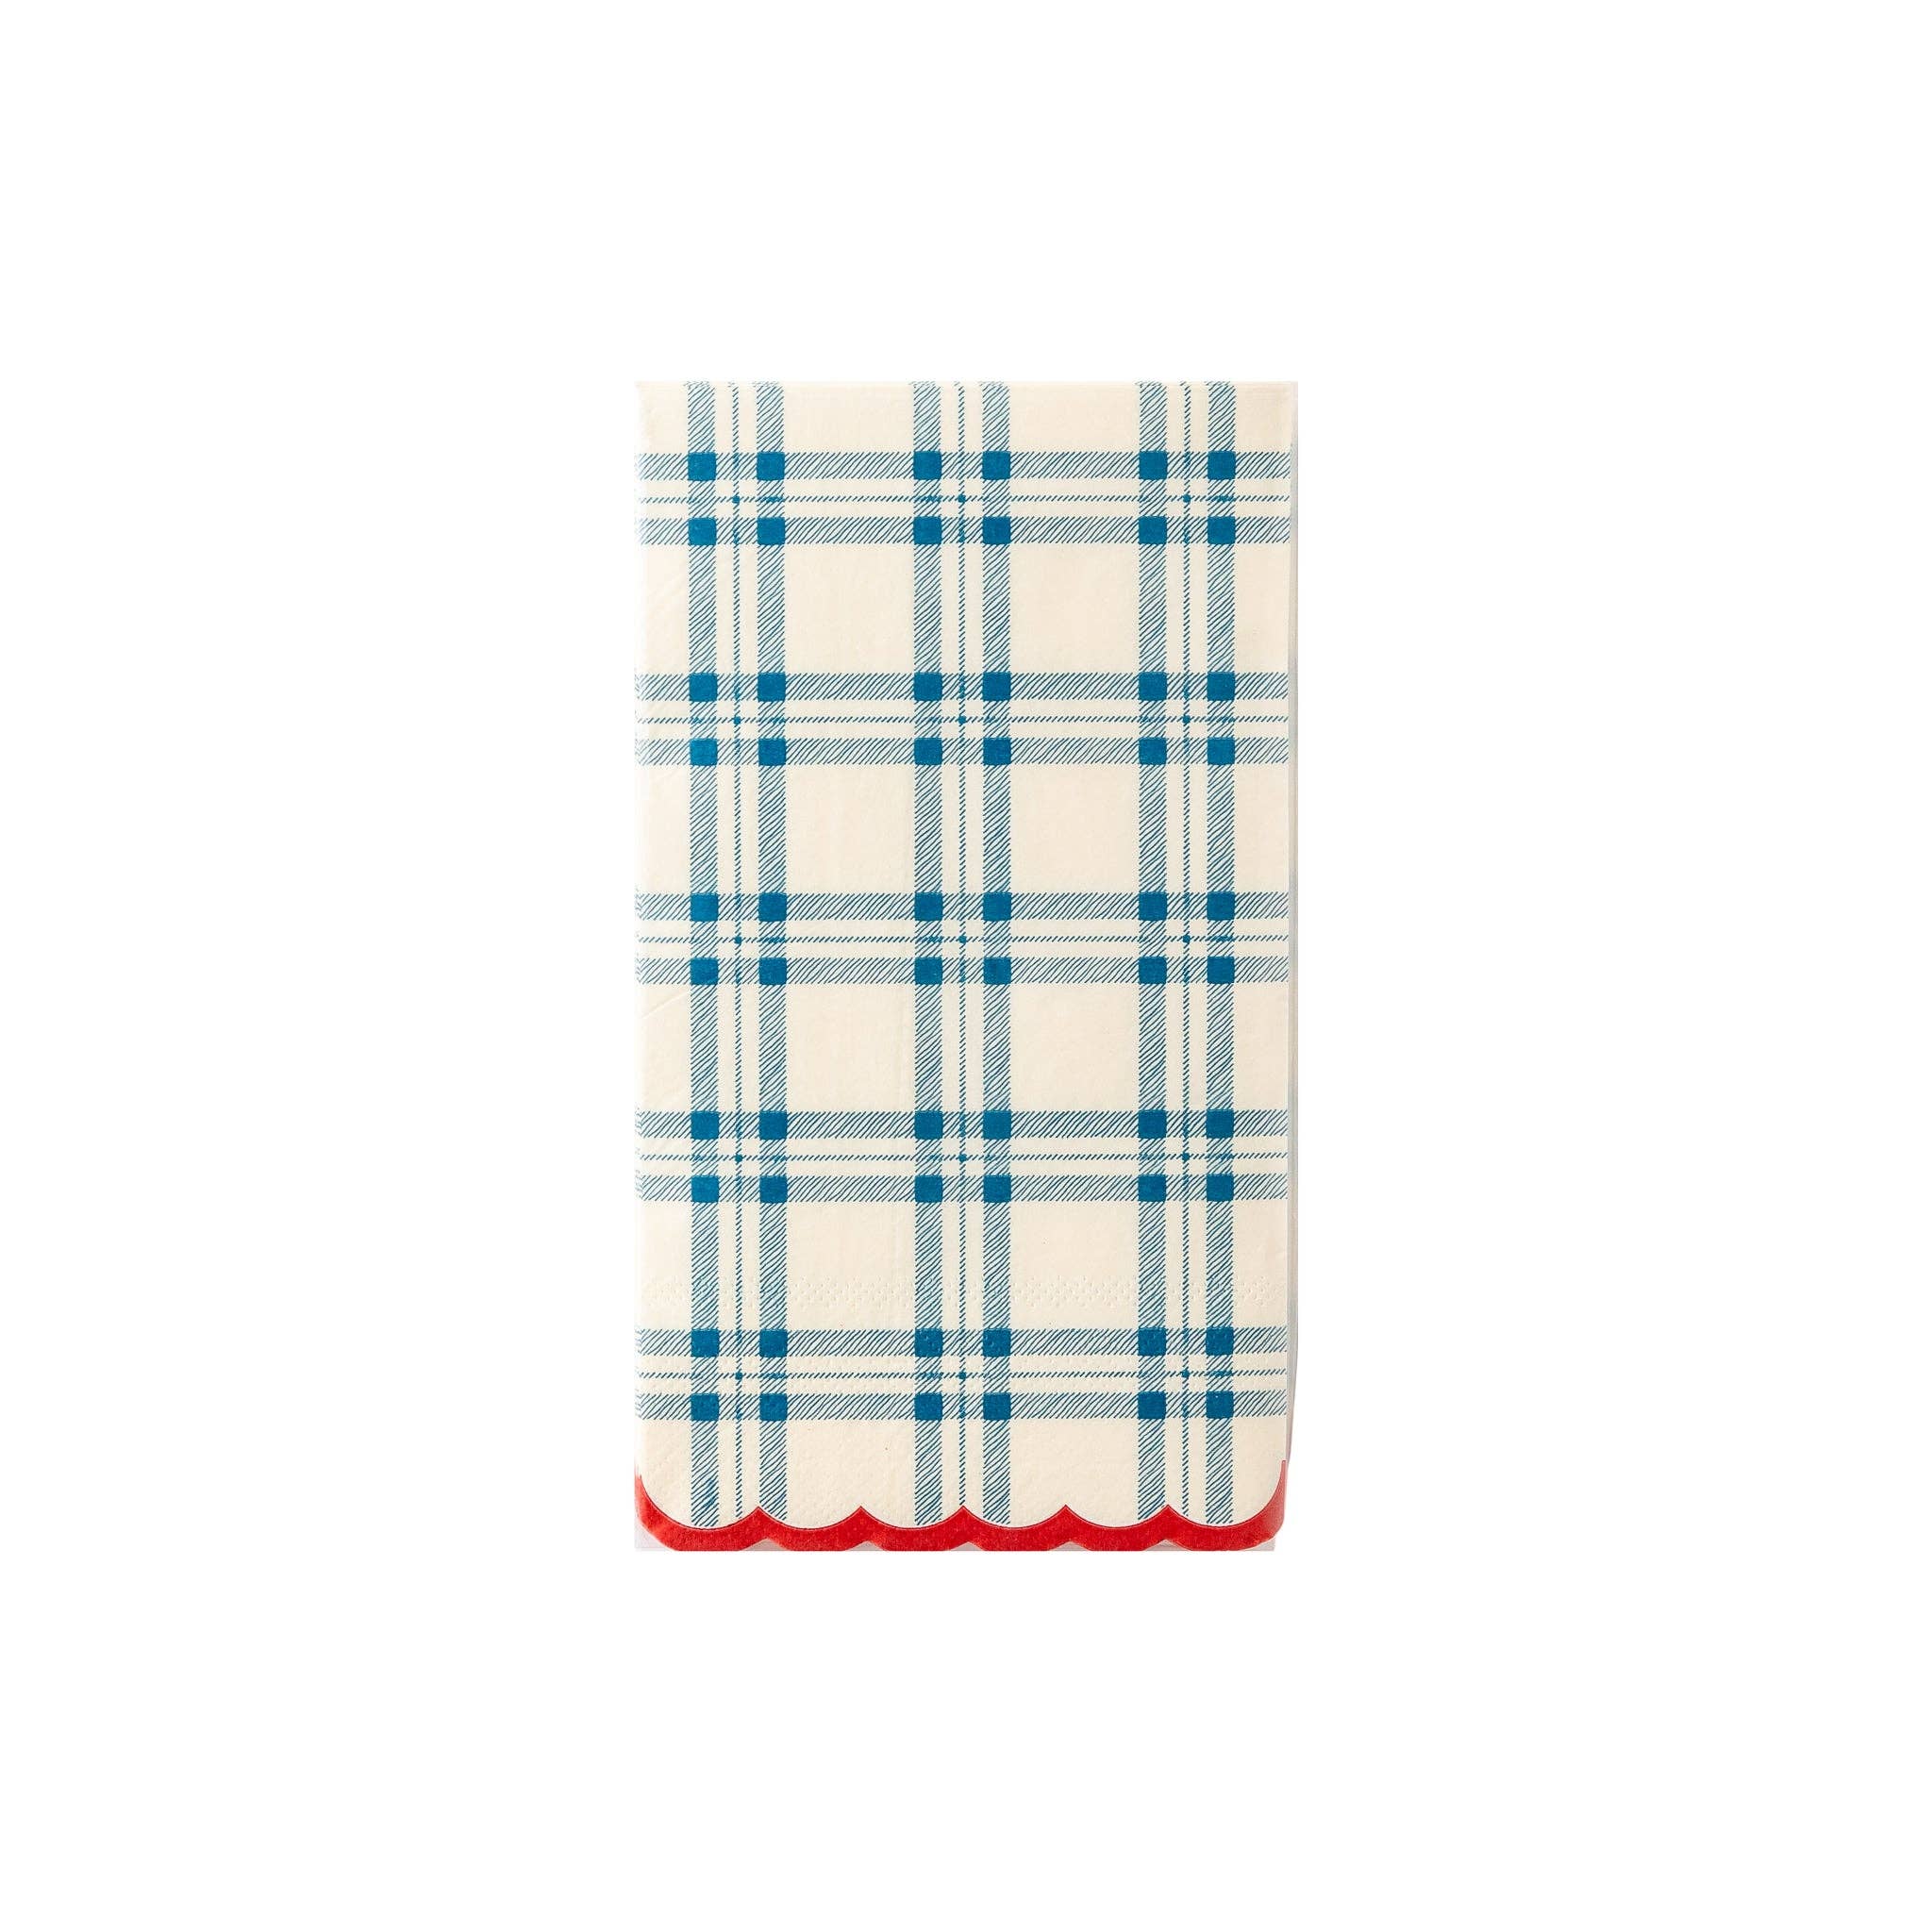 PLTS368o-MME - Blue Scallop Plaid Paper Dinner Napkin - Oh My Darling Party Co-Faire #Fringe_Backdrop#